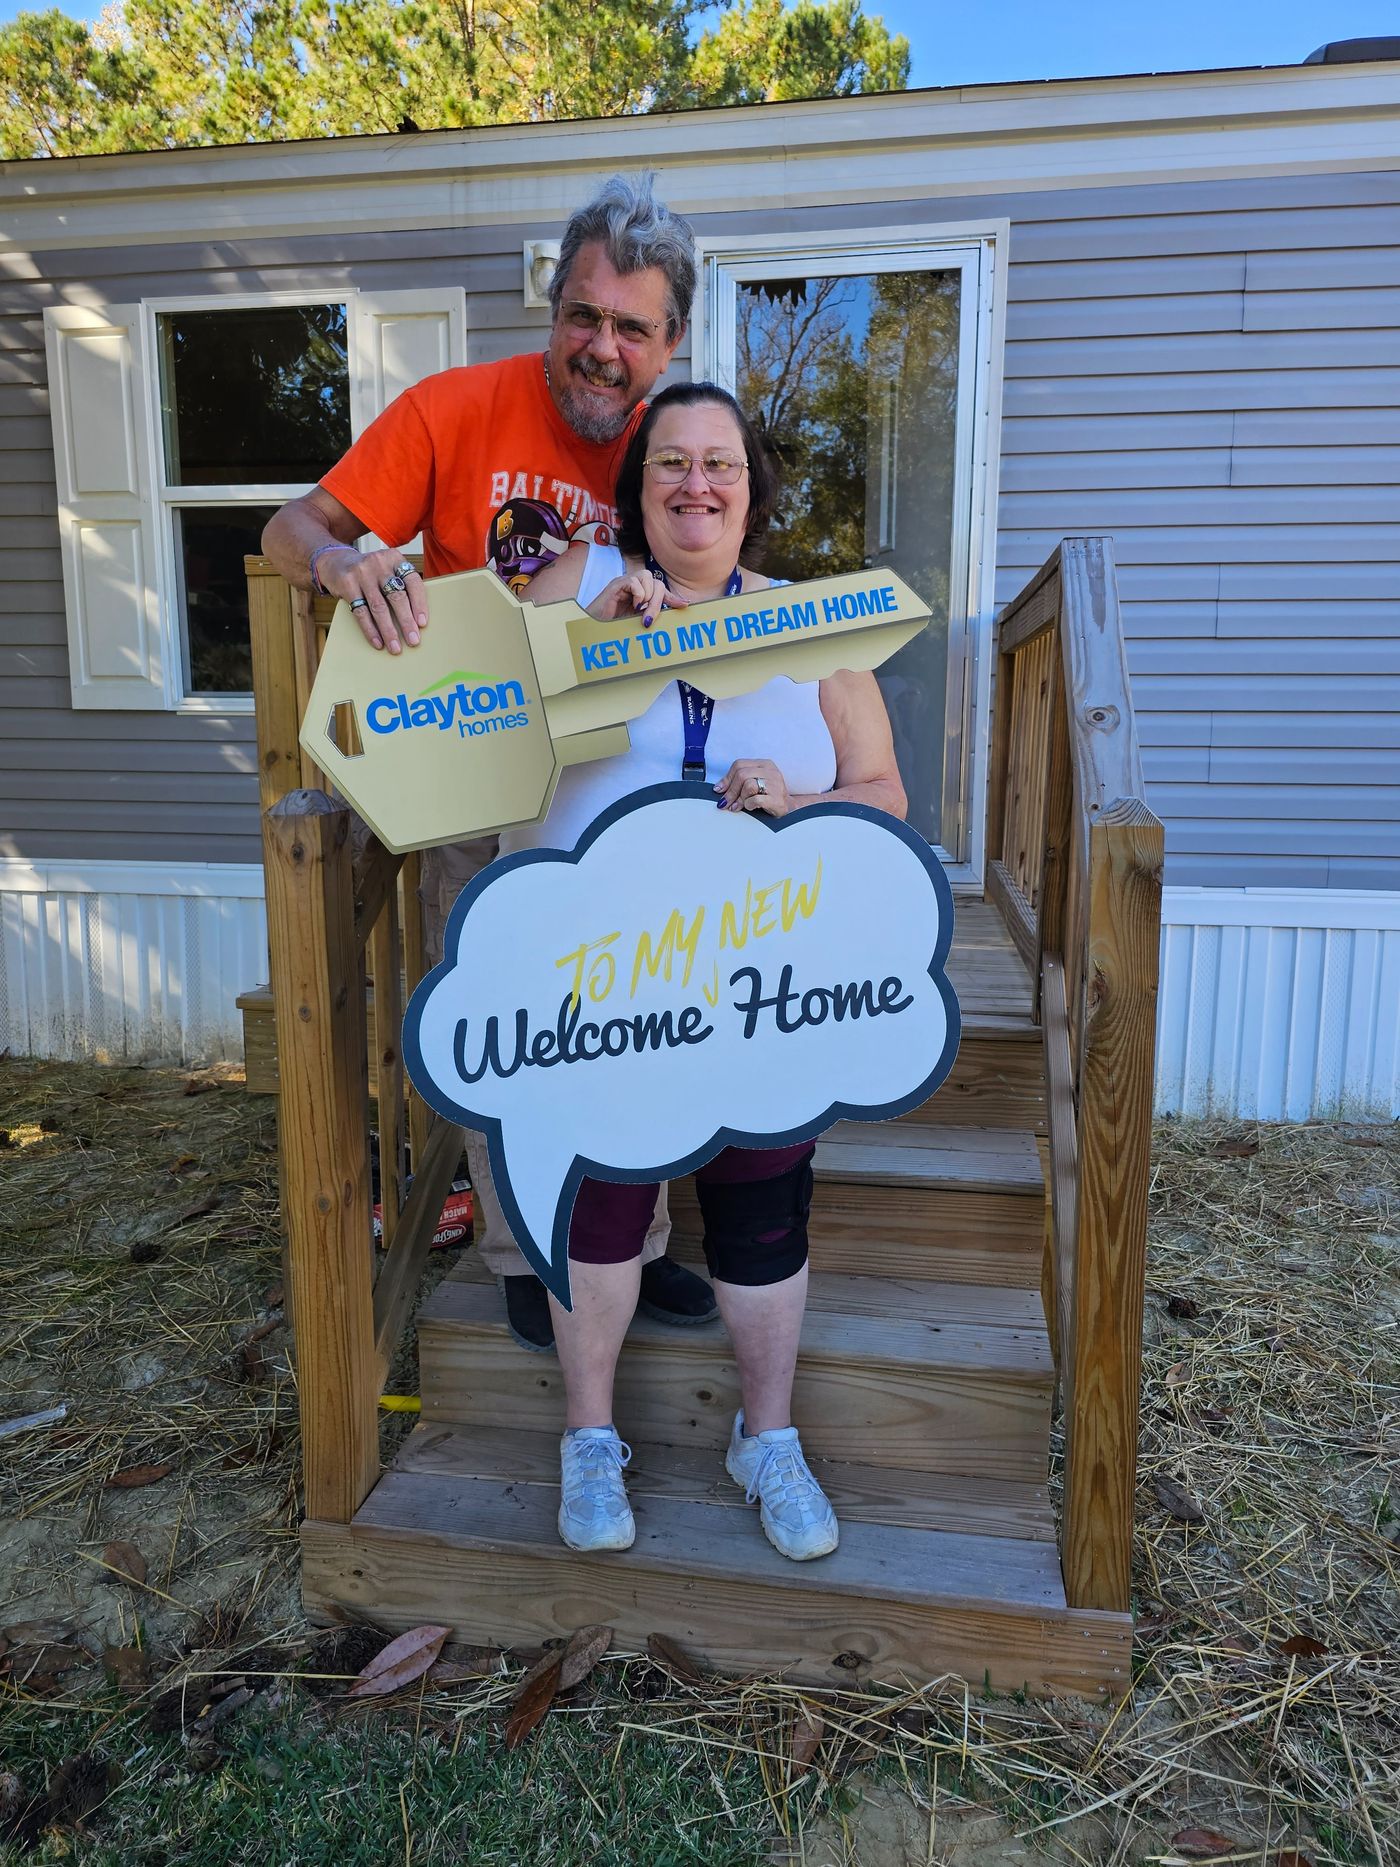 Margaret R. welcome home image